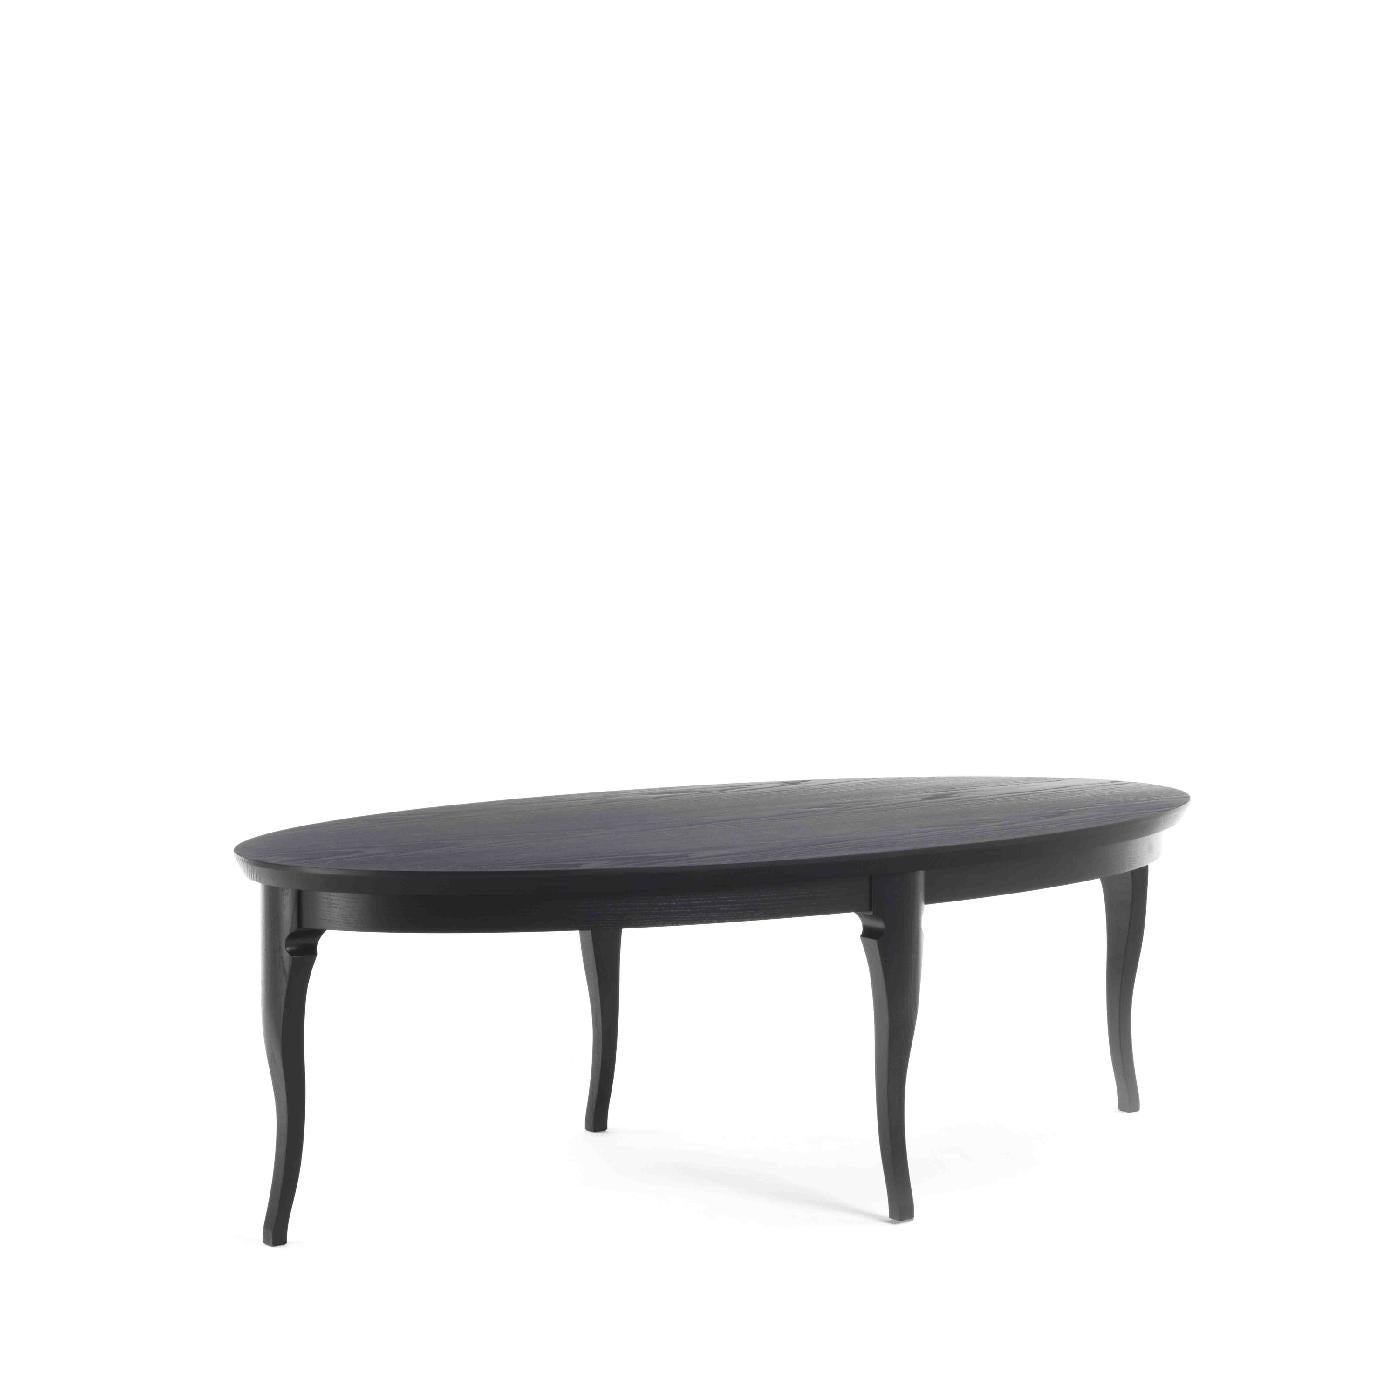 Defined by formal simplicity and midcentury inspiration, this coffee table combines elegance with functionality. Entirely handcrafted of wood with ash veneer and an ebonized finish, the piece has an oval top raised on cabriole legs placed at the